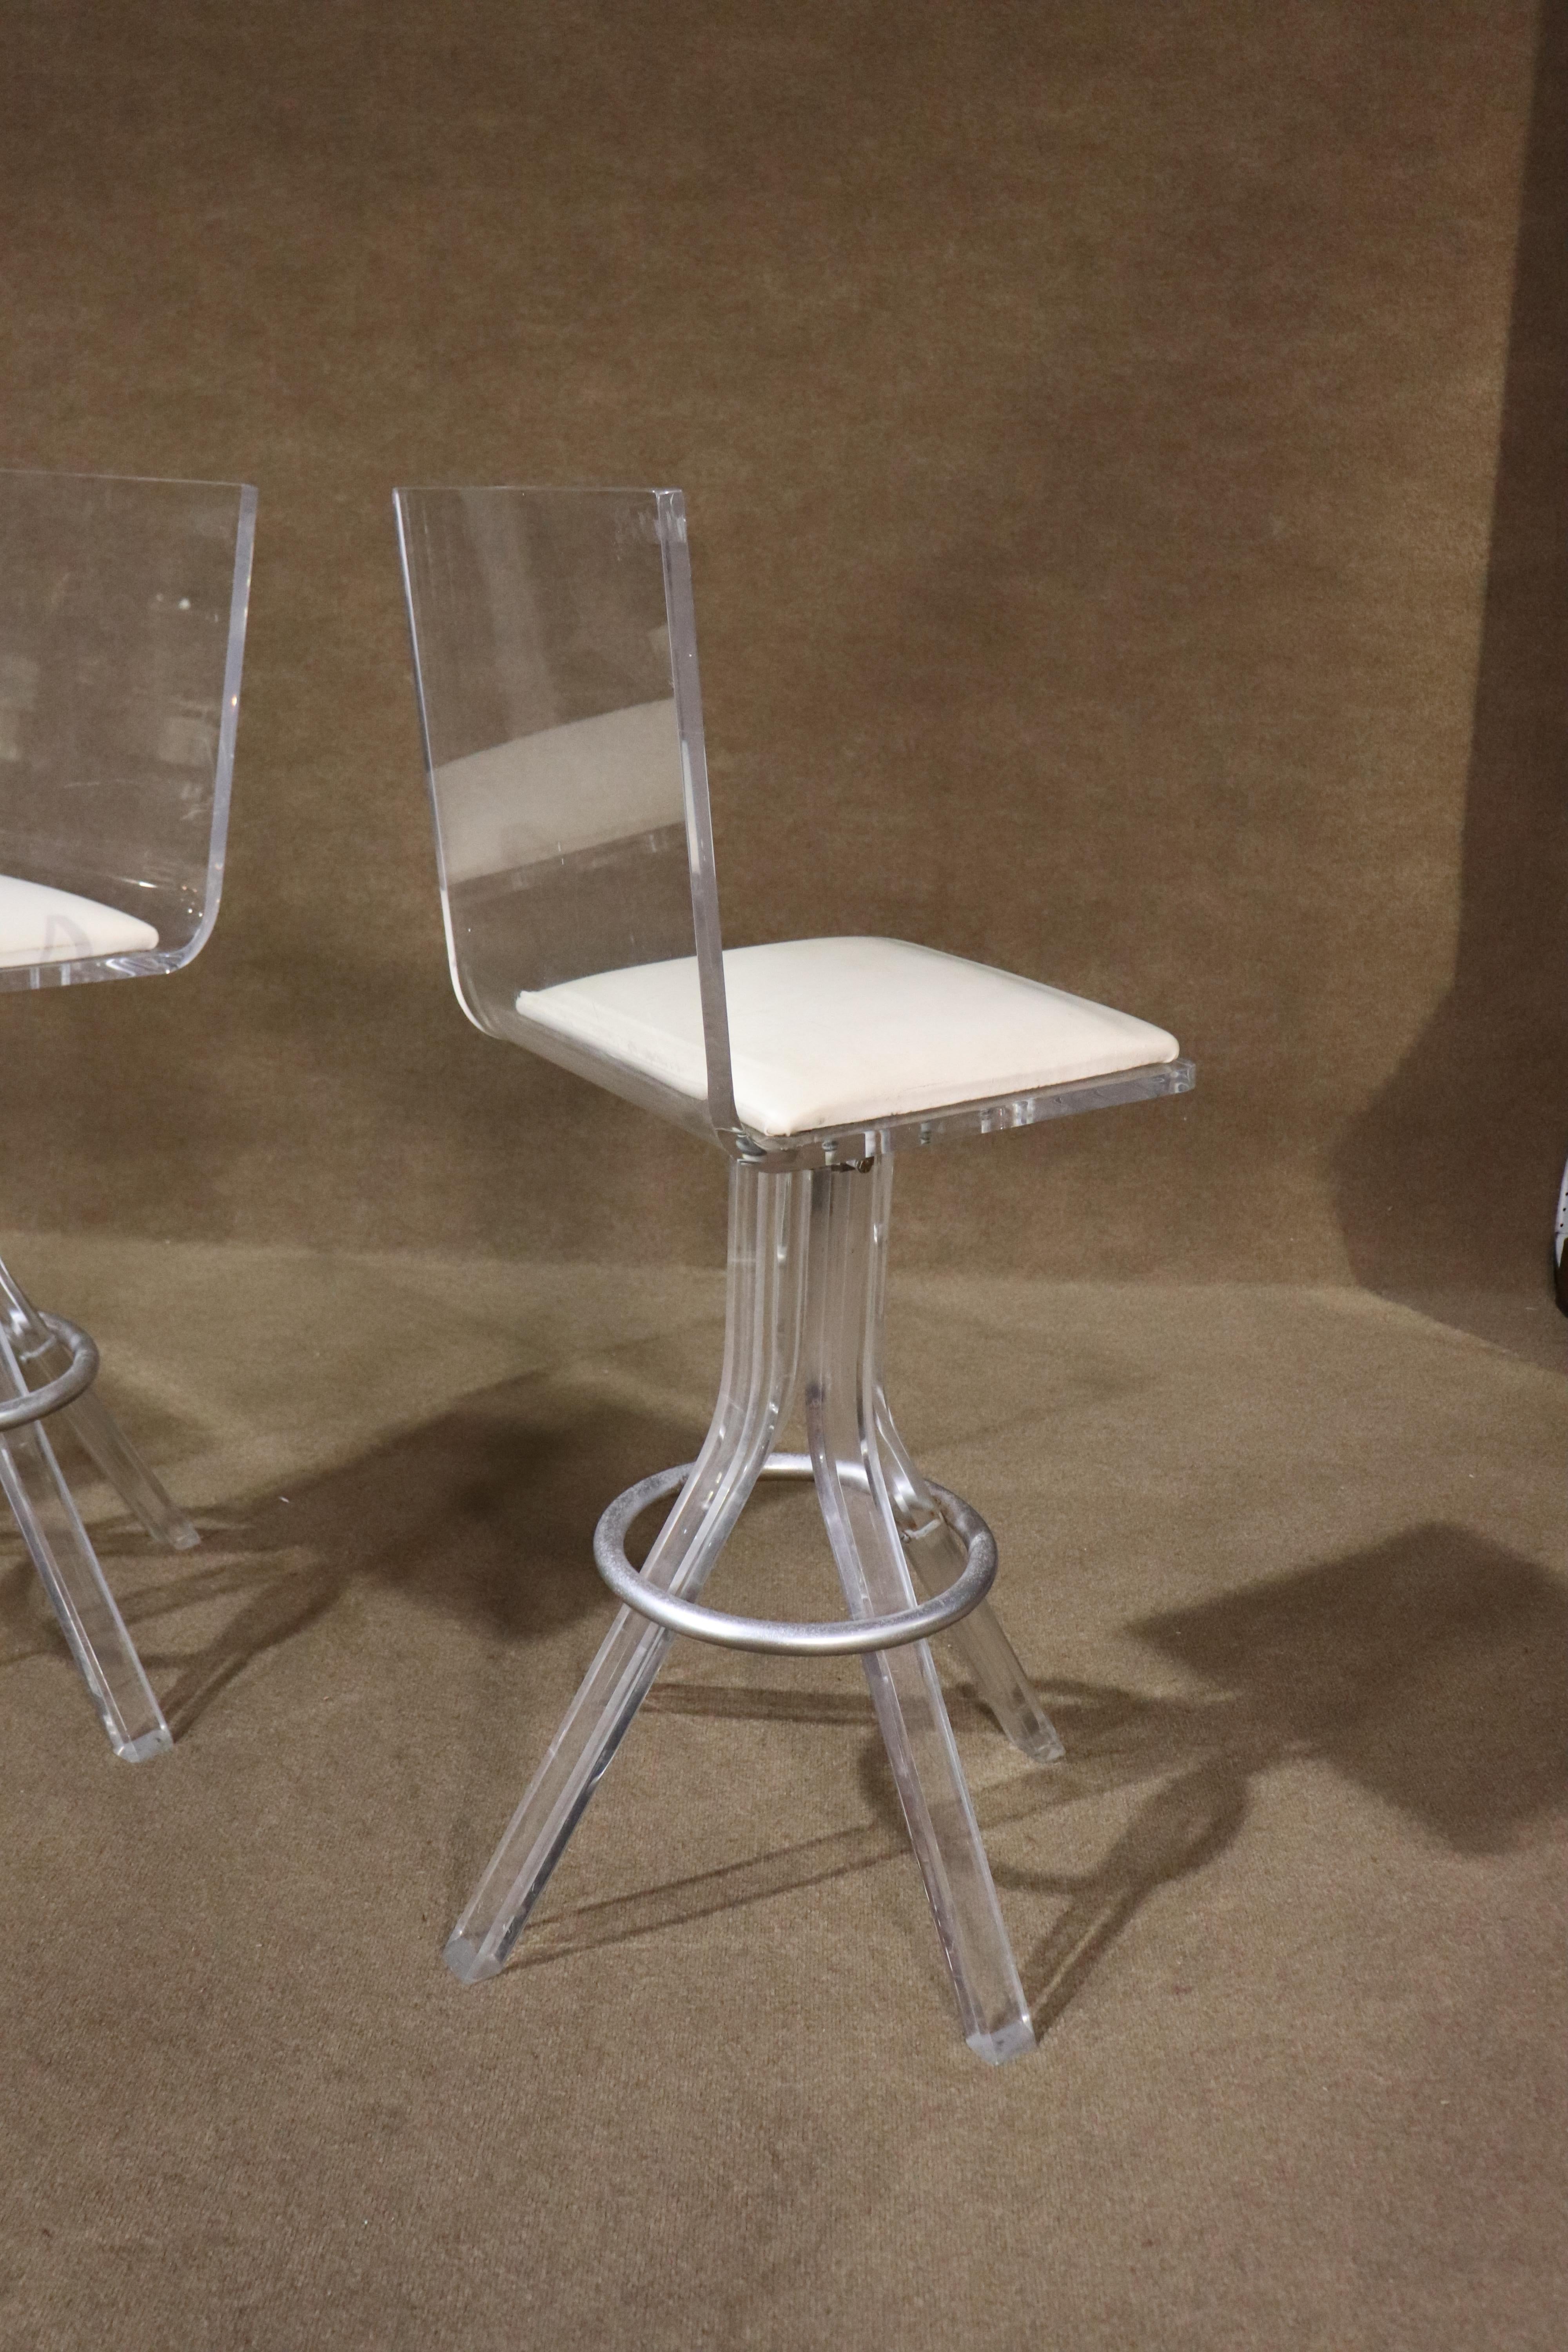 Mid-century modern clear acrylic stools with metal footrests. Vinyl cushioned seat, with four sturdy lucite legs.
Please confirm location NY or NJ